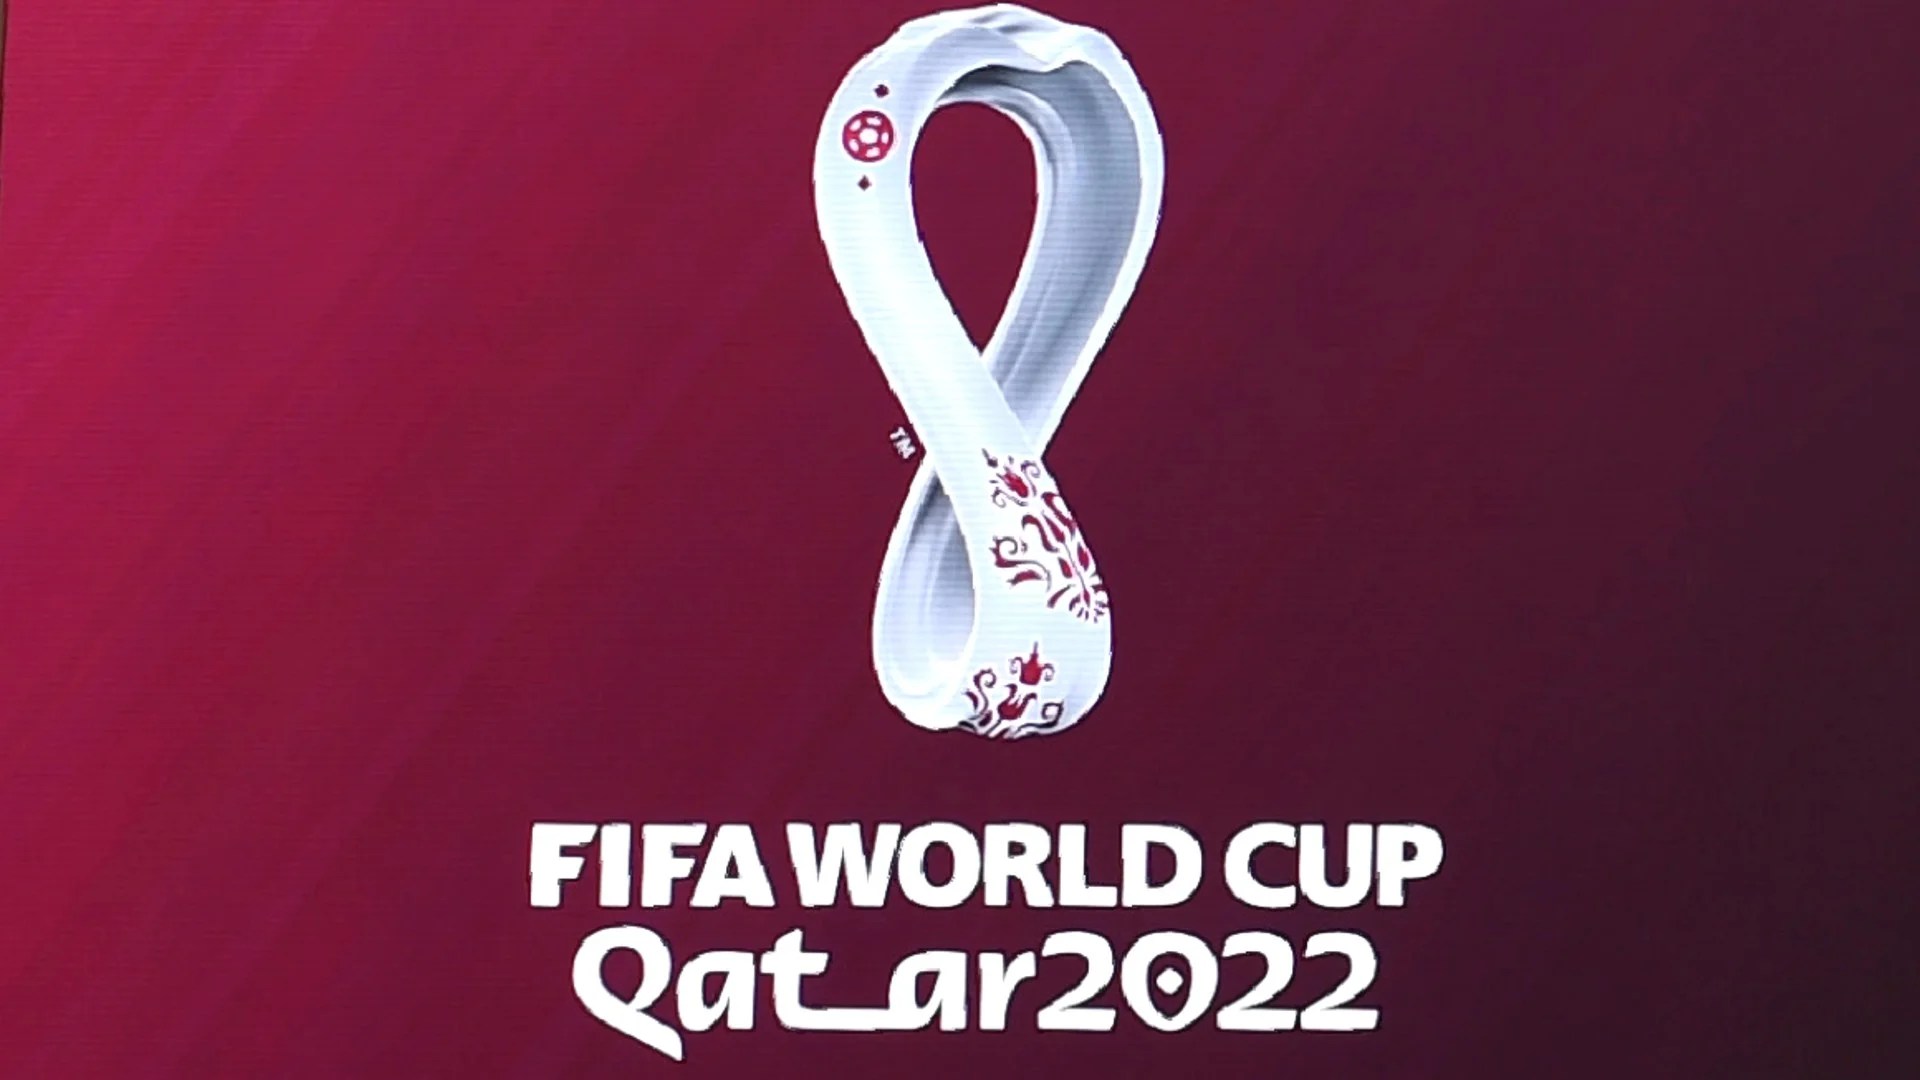 Top 5 nations in the FIFA World Rankings who will not compete in the FIFA World Cup Qatar 2022